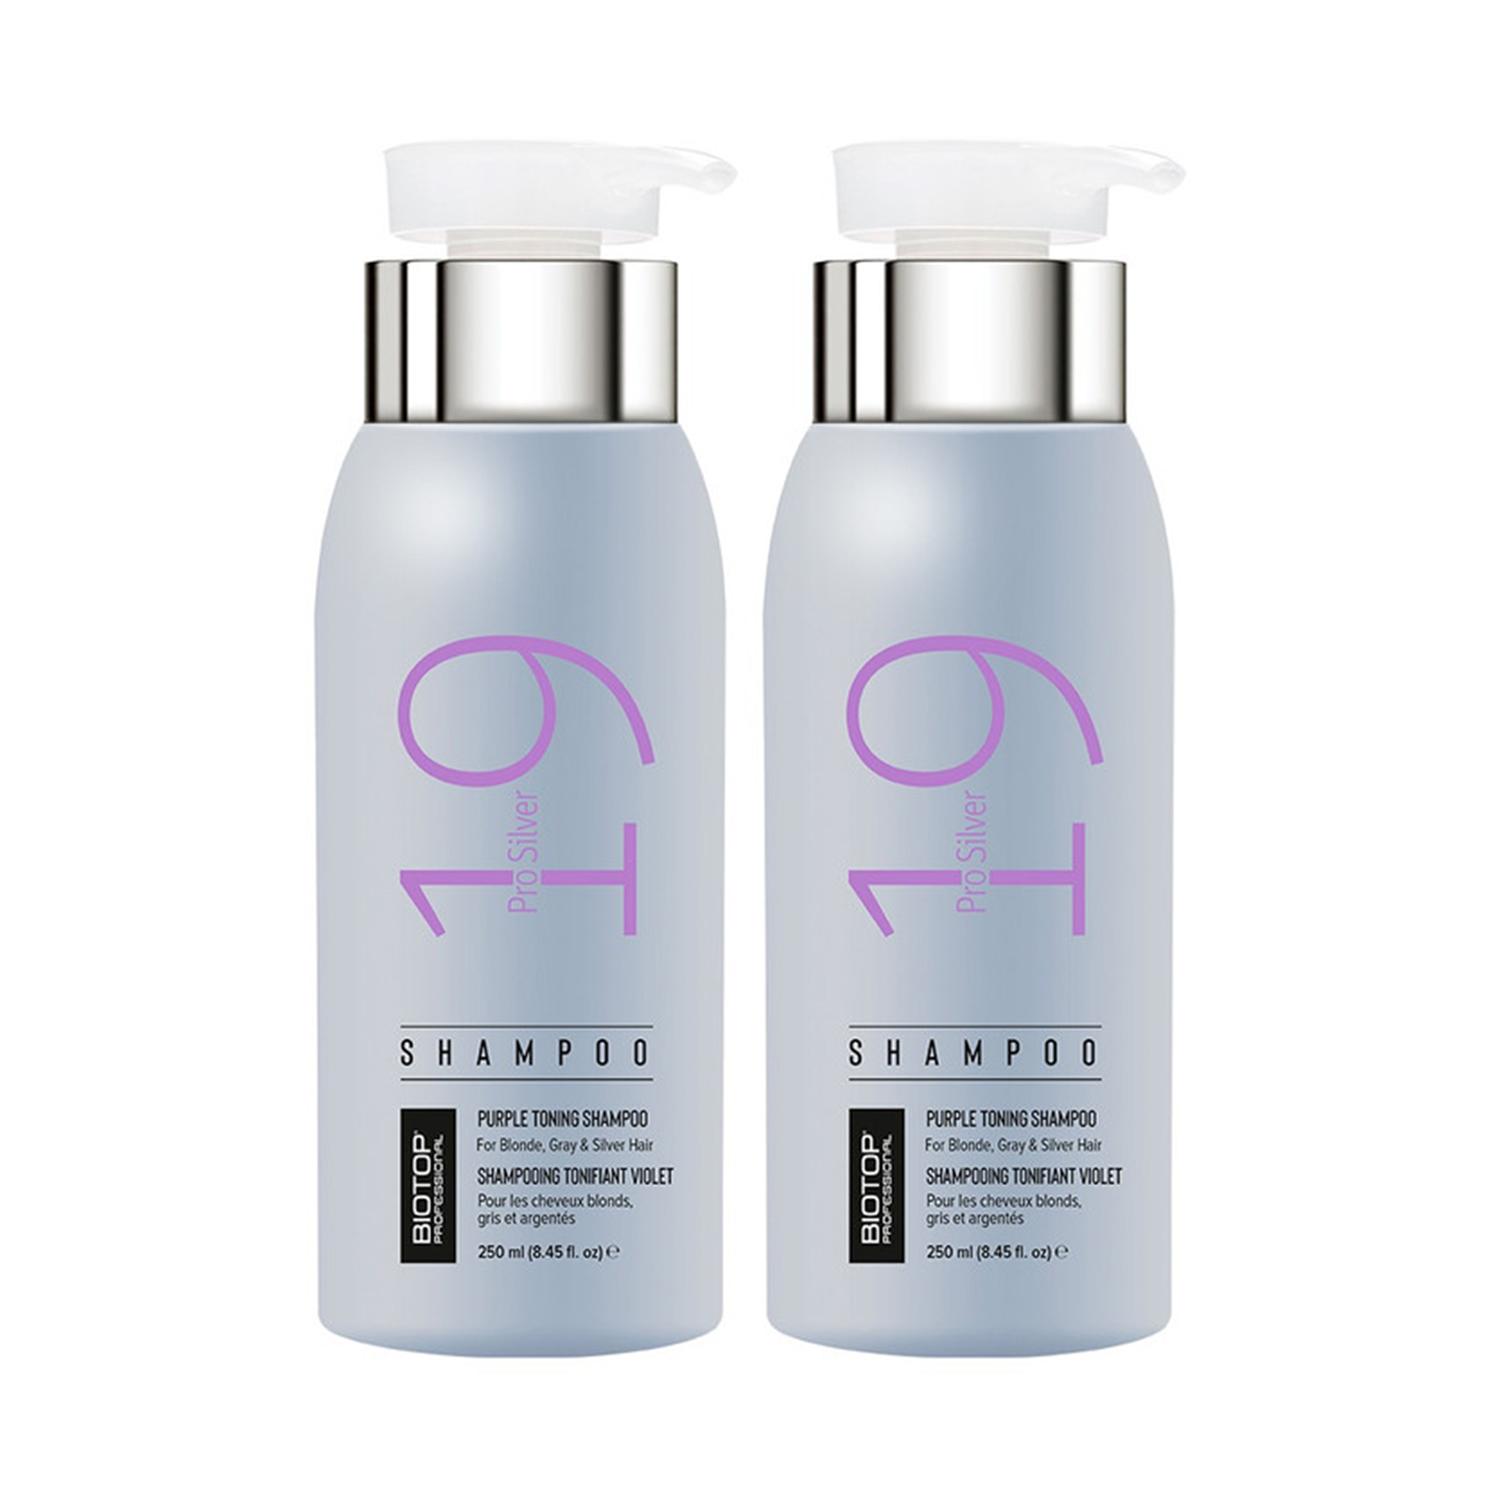 Biotop Professional | Biotop Professional 19 Shampoo Pro Silver (250ml) Each (Pack of 2) Combo